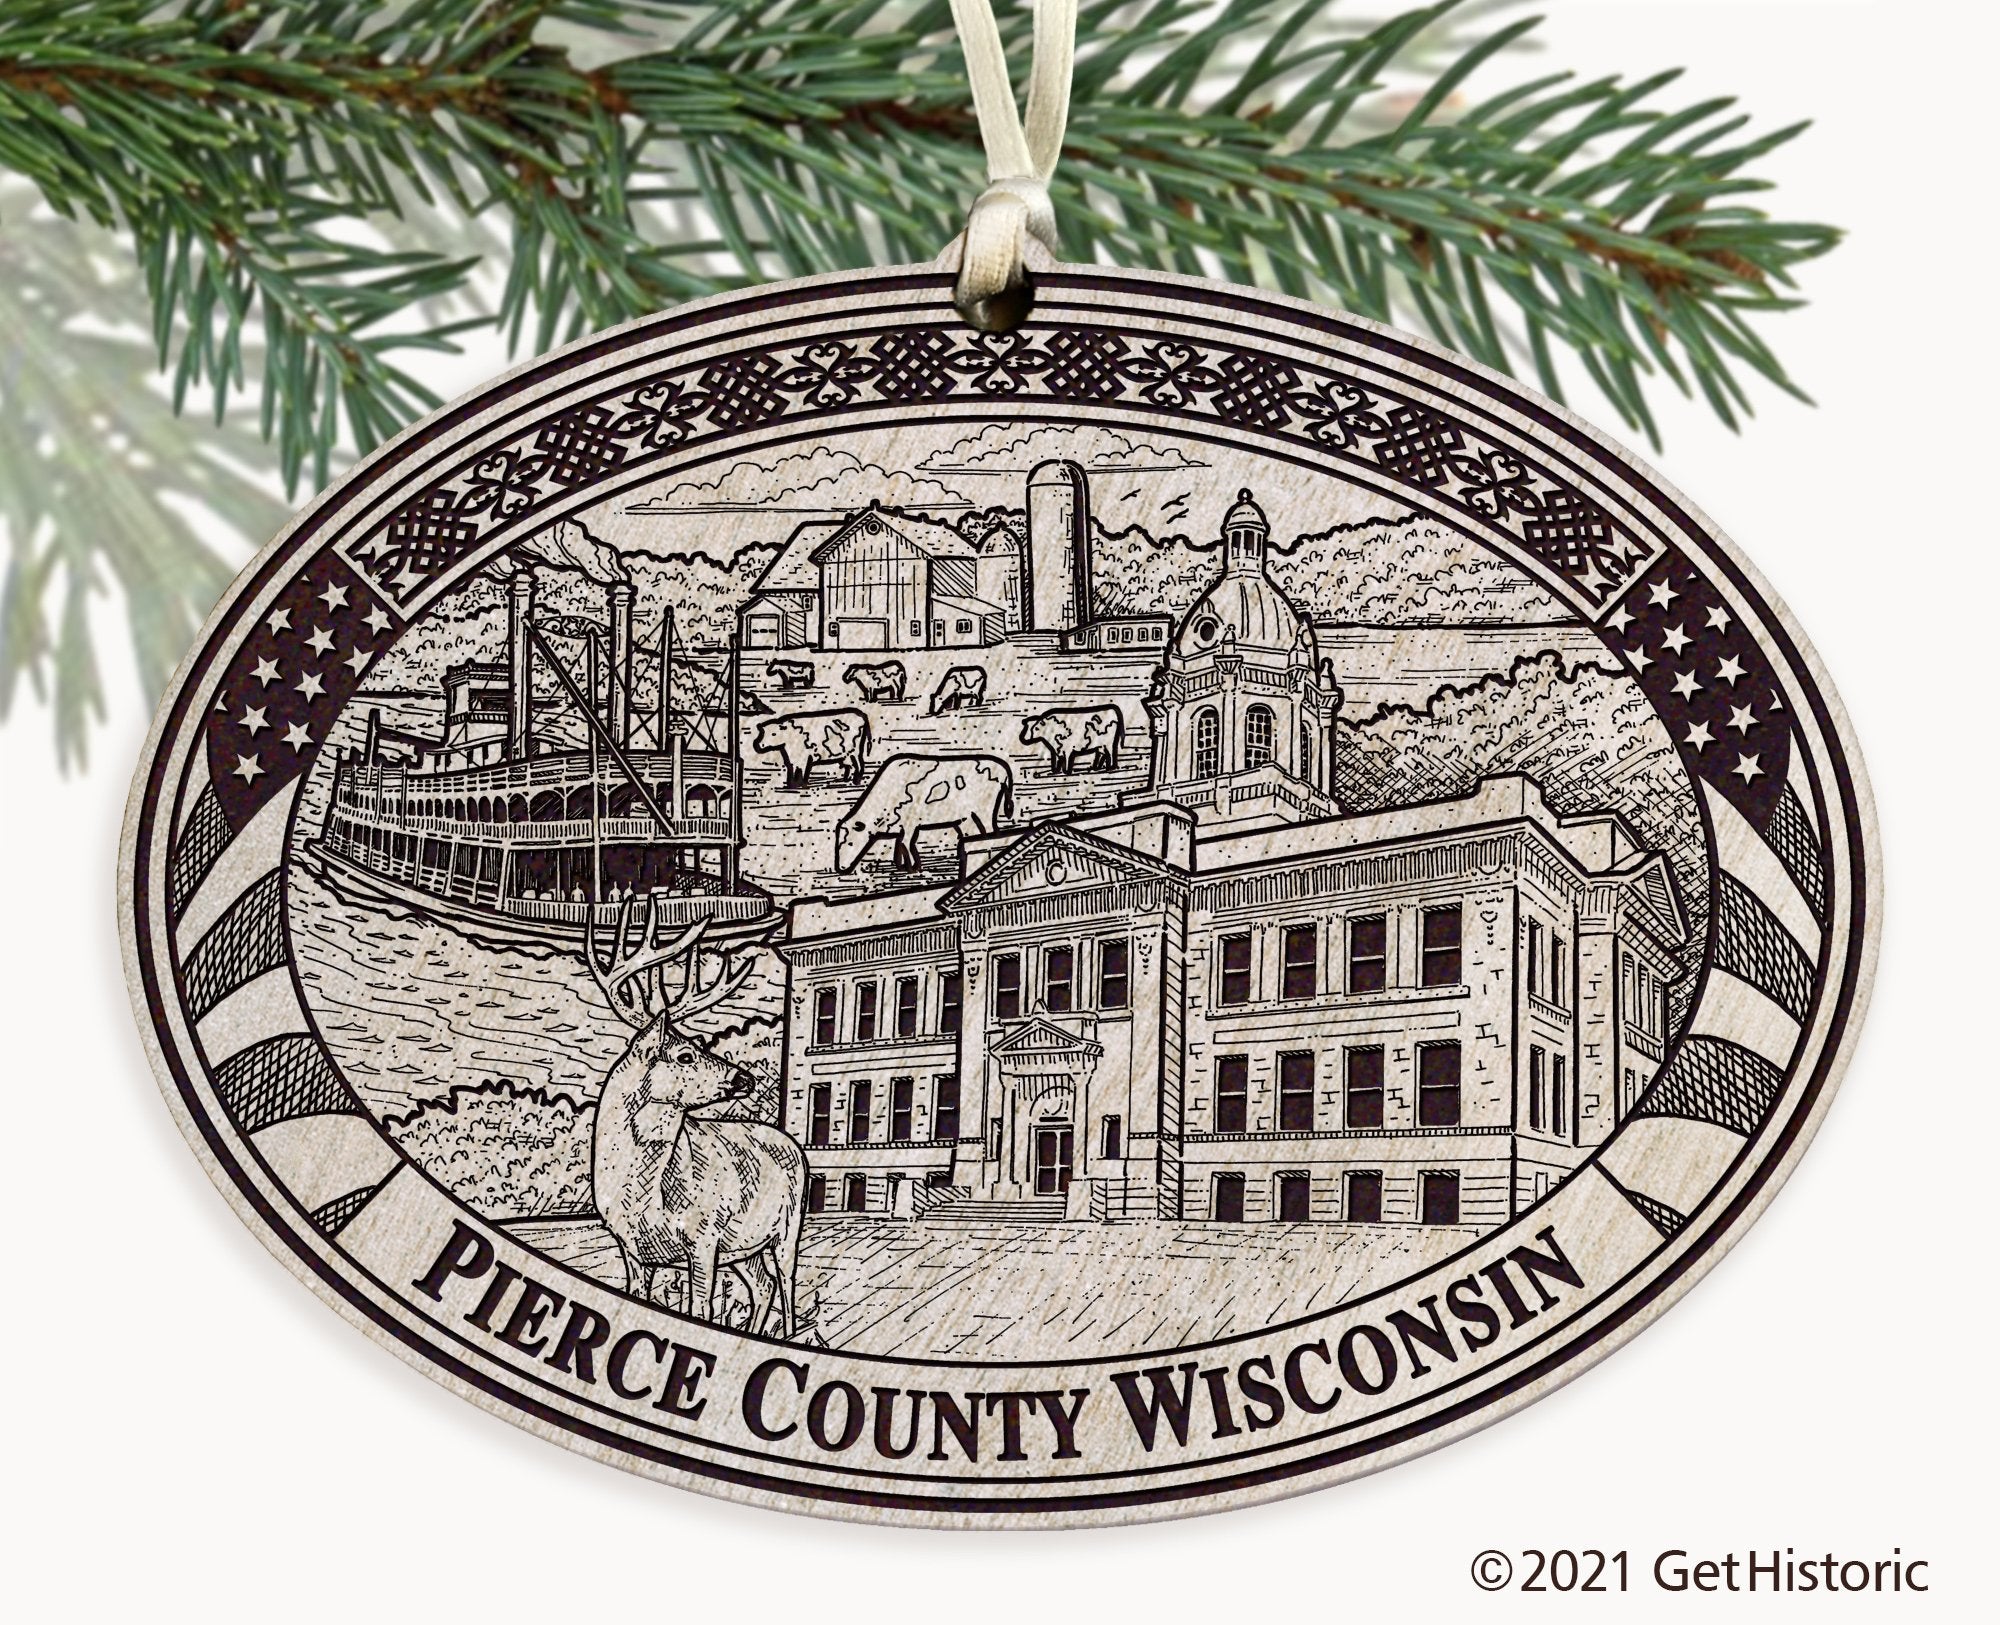 Pierce County Wisconsin Engraved Ornament